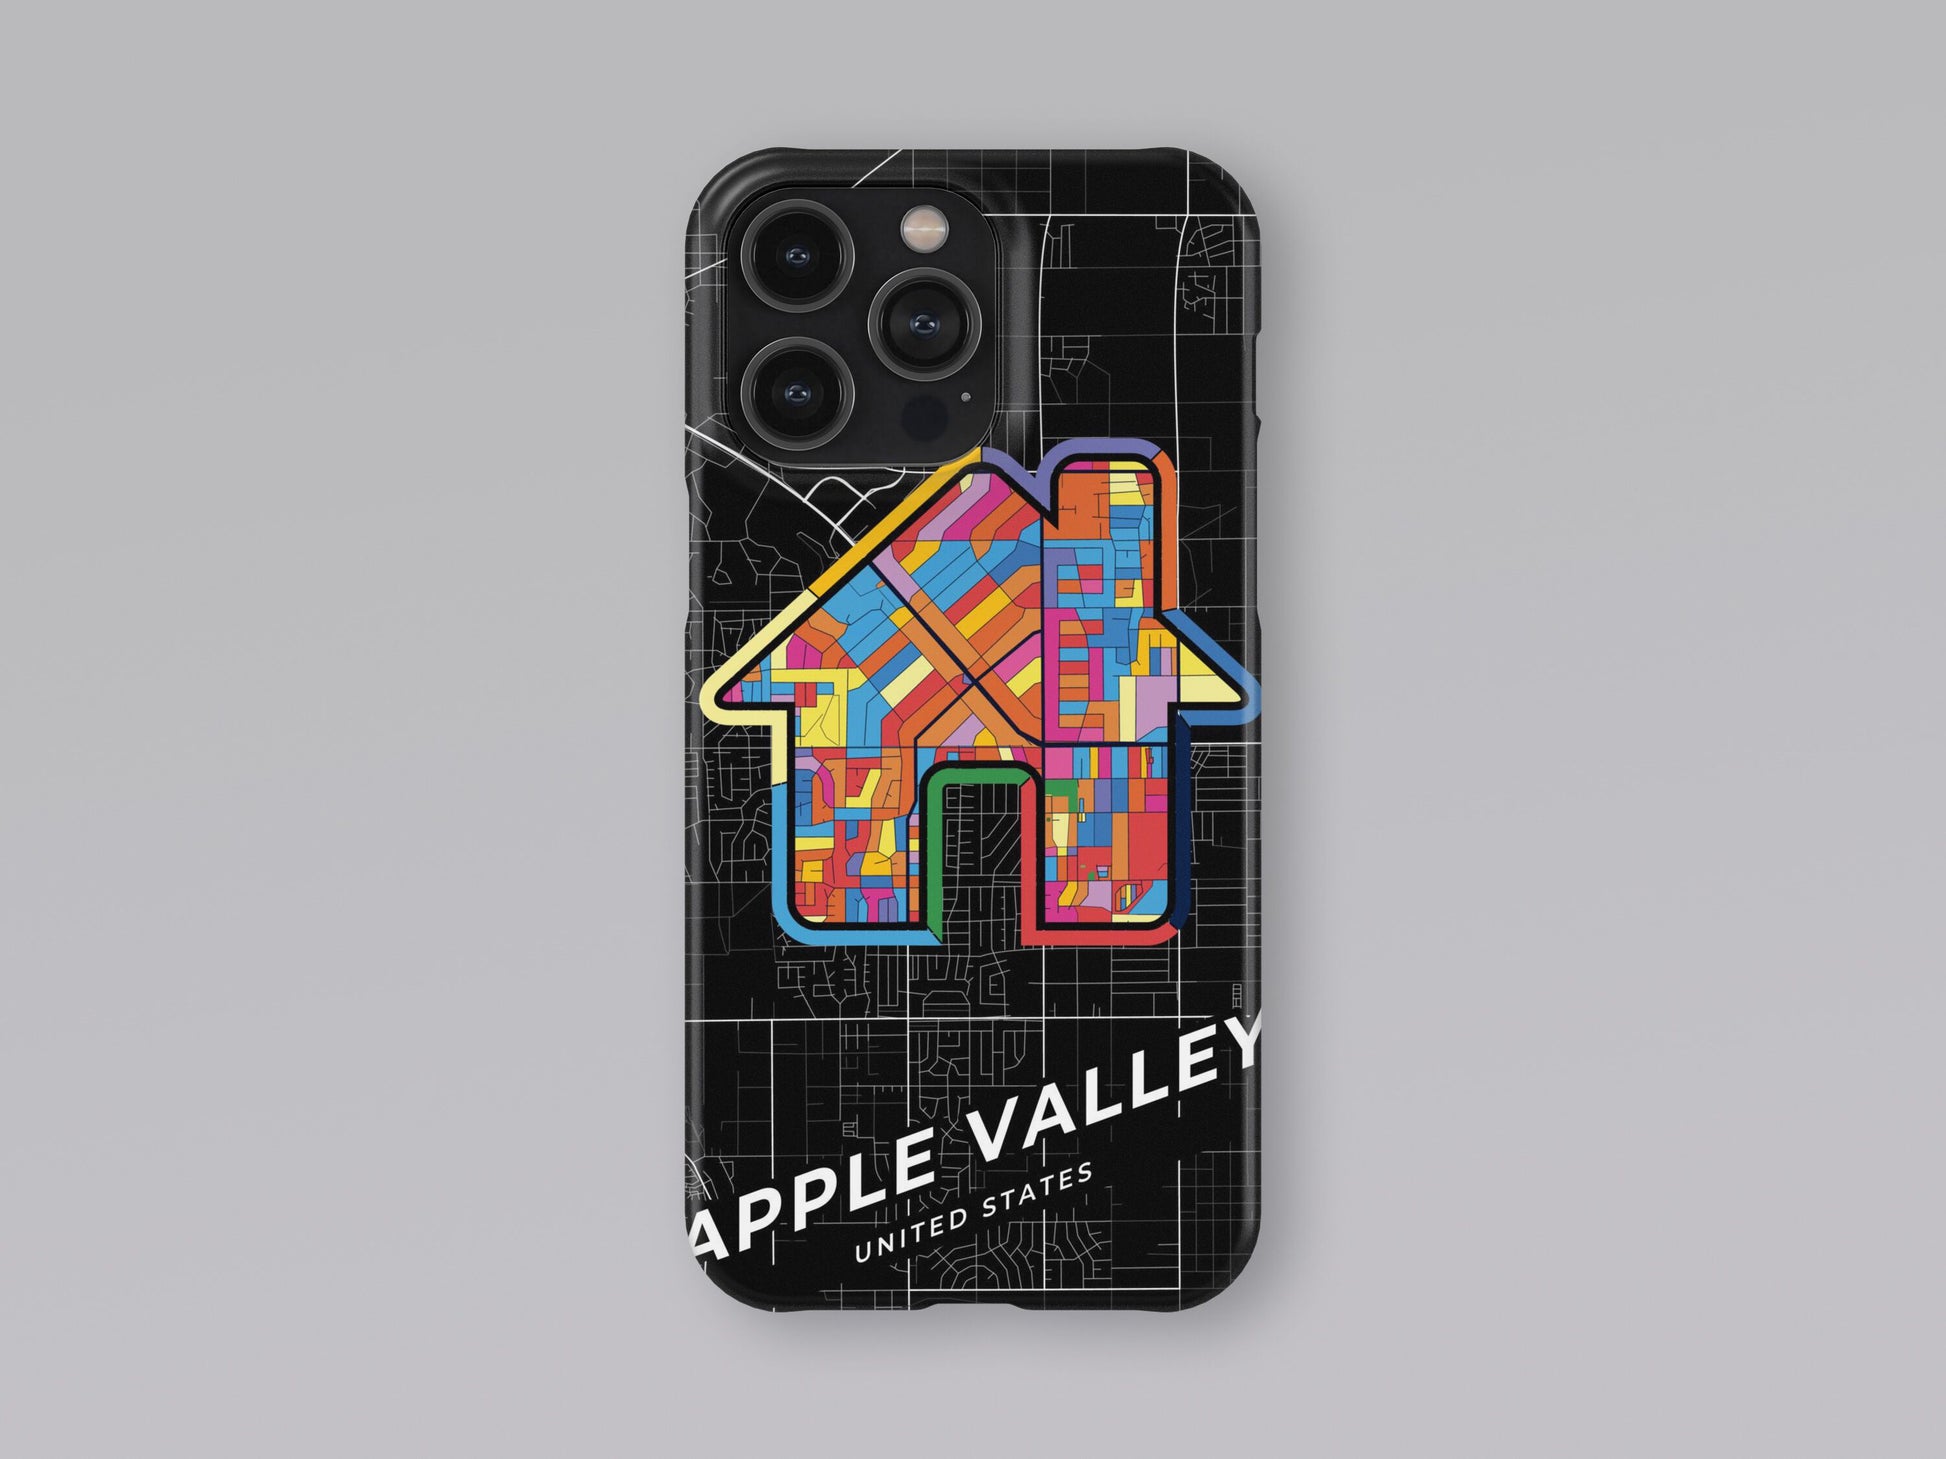 Apple Valley California slim phone case with colorful icon. Birthday, wedding or housewarming gift. Couple match cases. 3